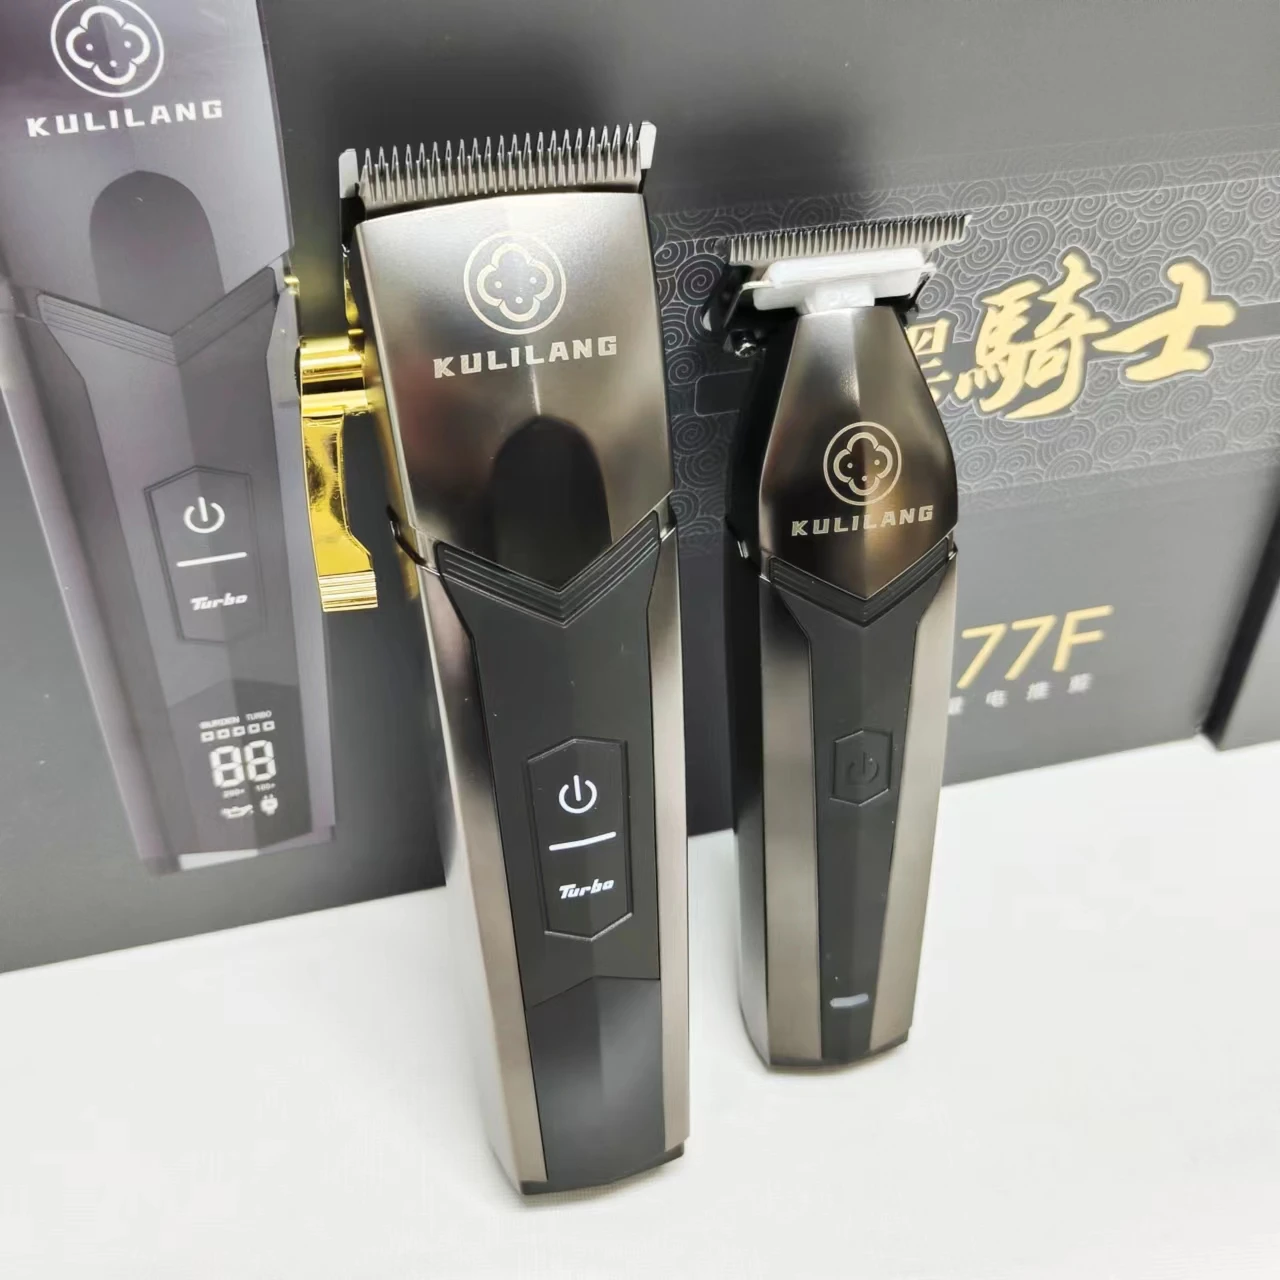 

2023 Madeshow Electric LCD Intelligent Display Hair Clipper FADE+DLC Coated Blade High Power 7200RPM Quality Men's Hair Trimmer